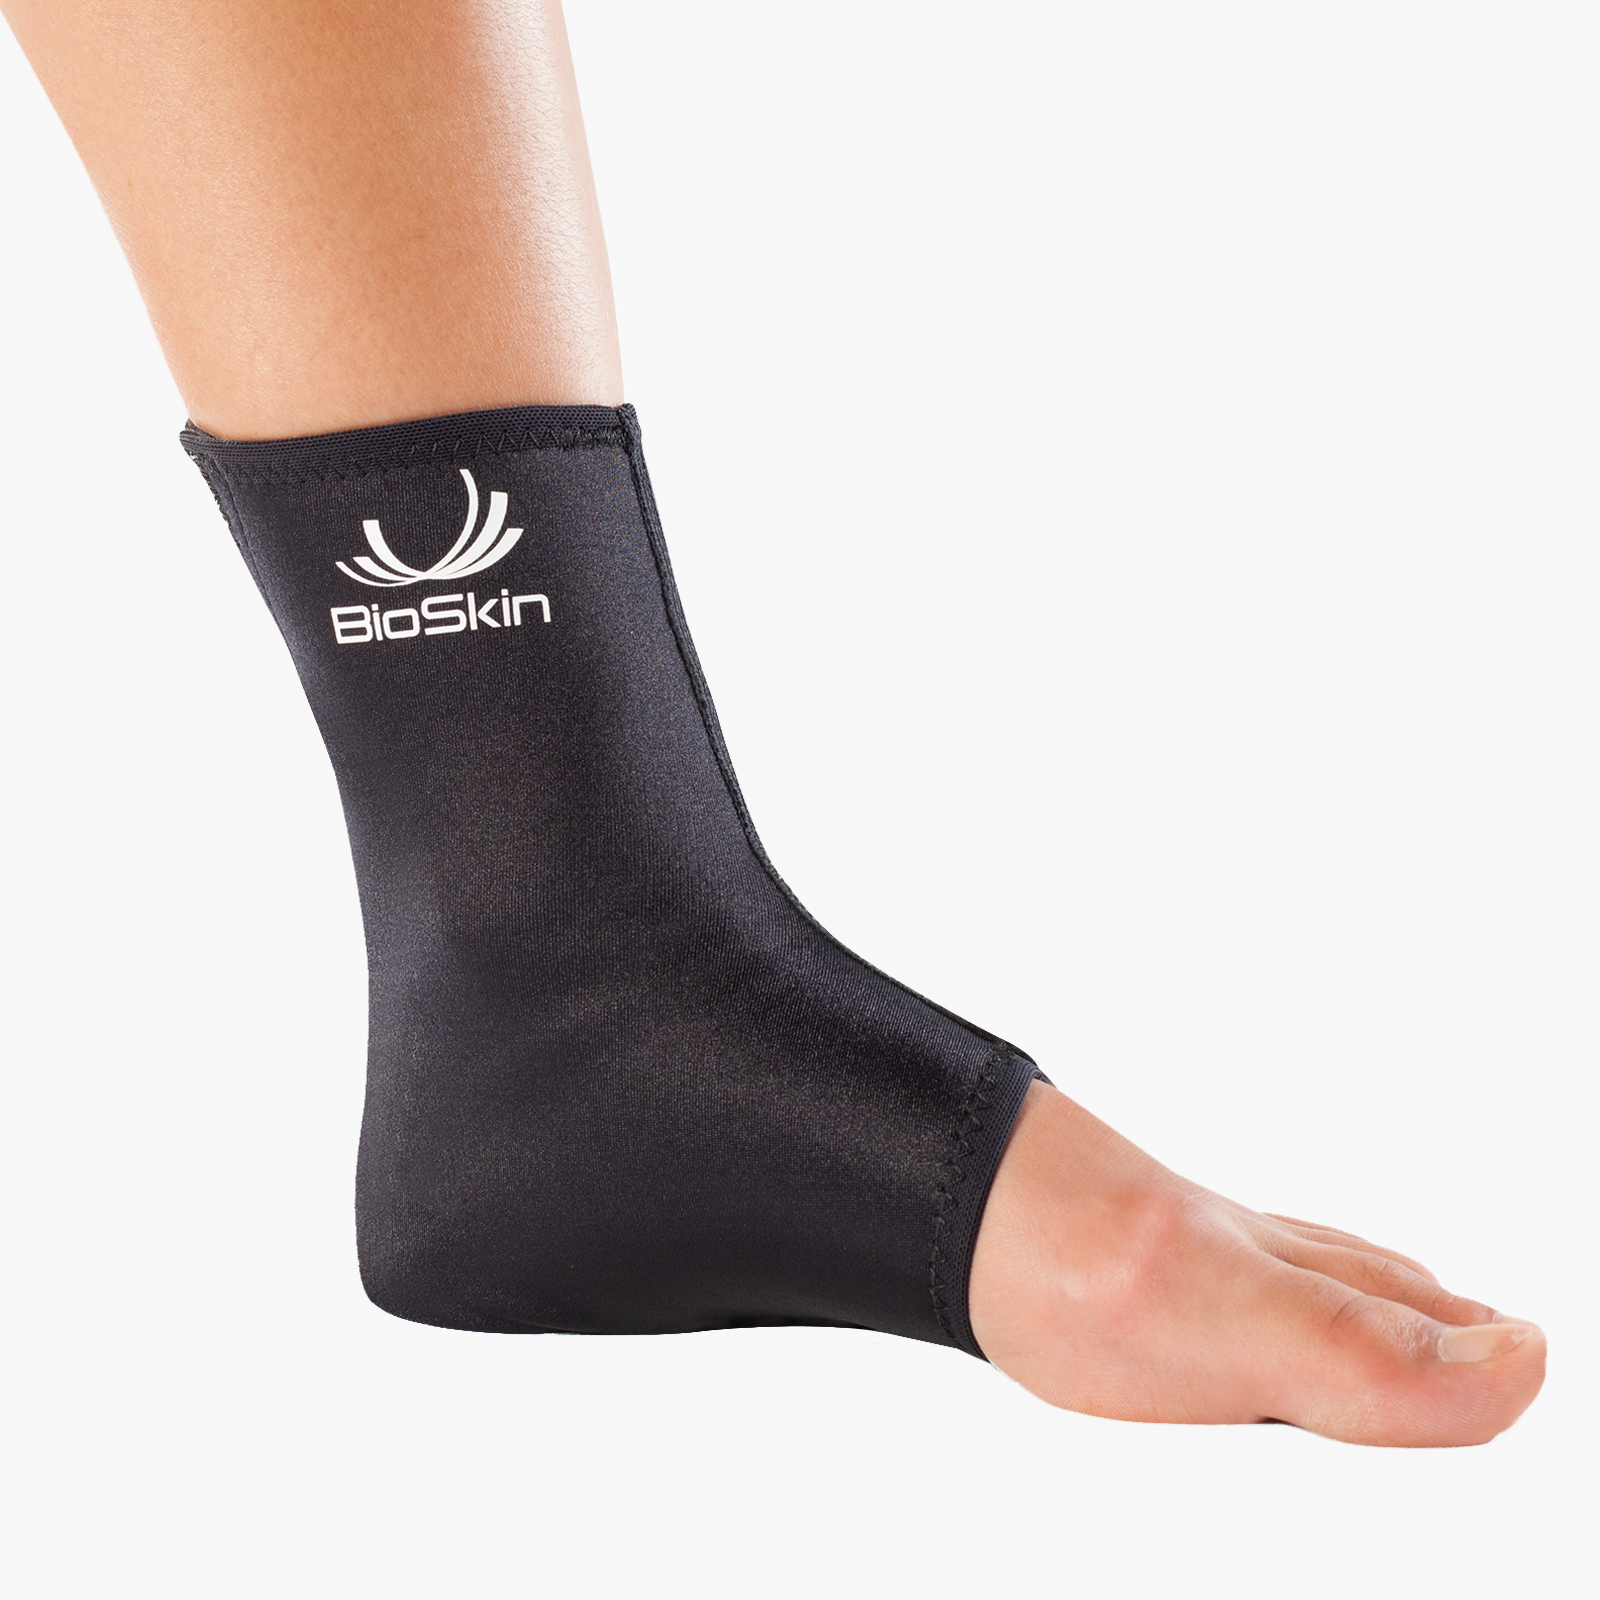 BioSkin Ankle Sleeve: Figure 8 Compression & Stability